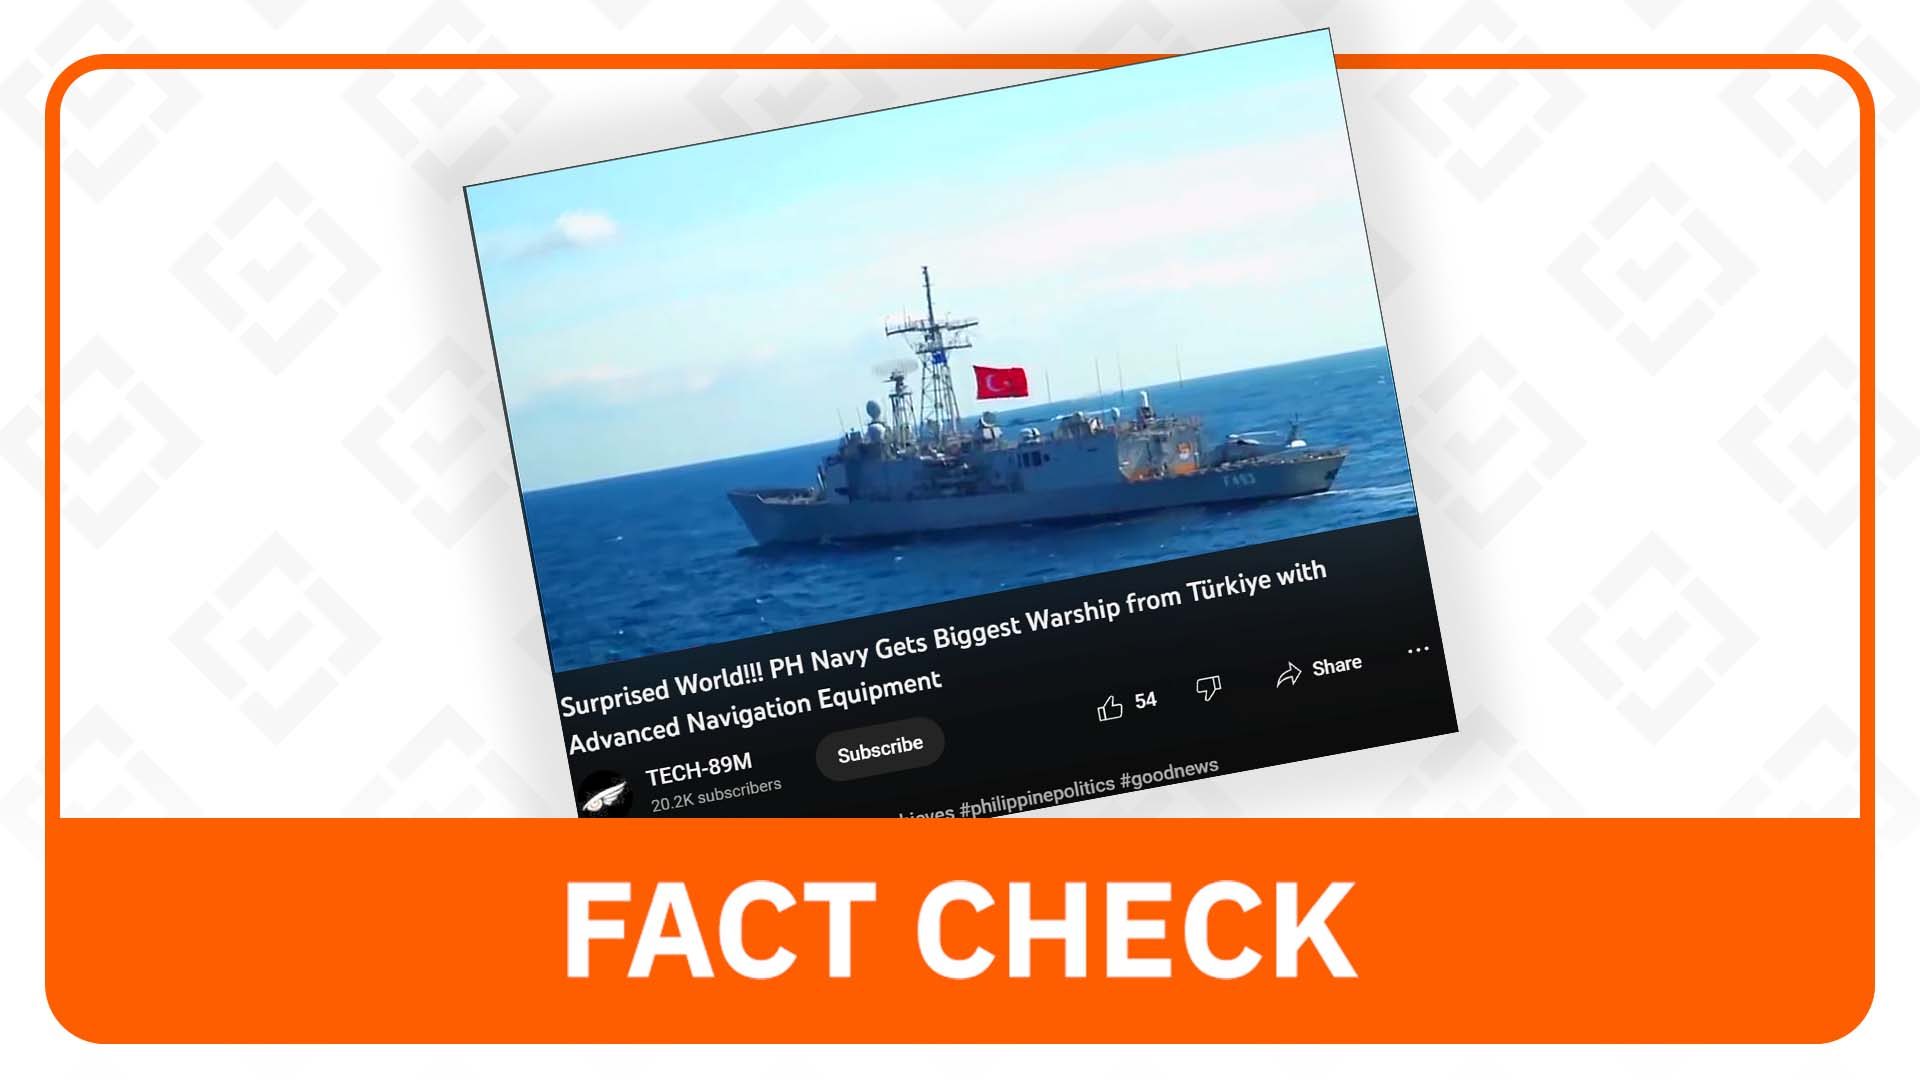 FACT CHECK: No PH acquisition of warship from Turkey